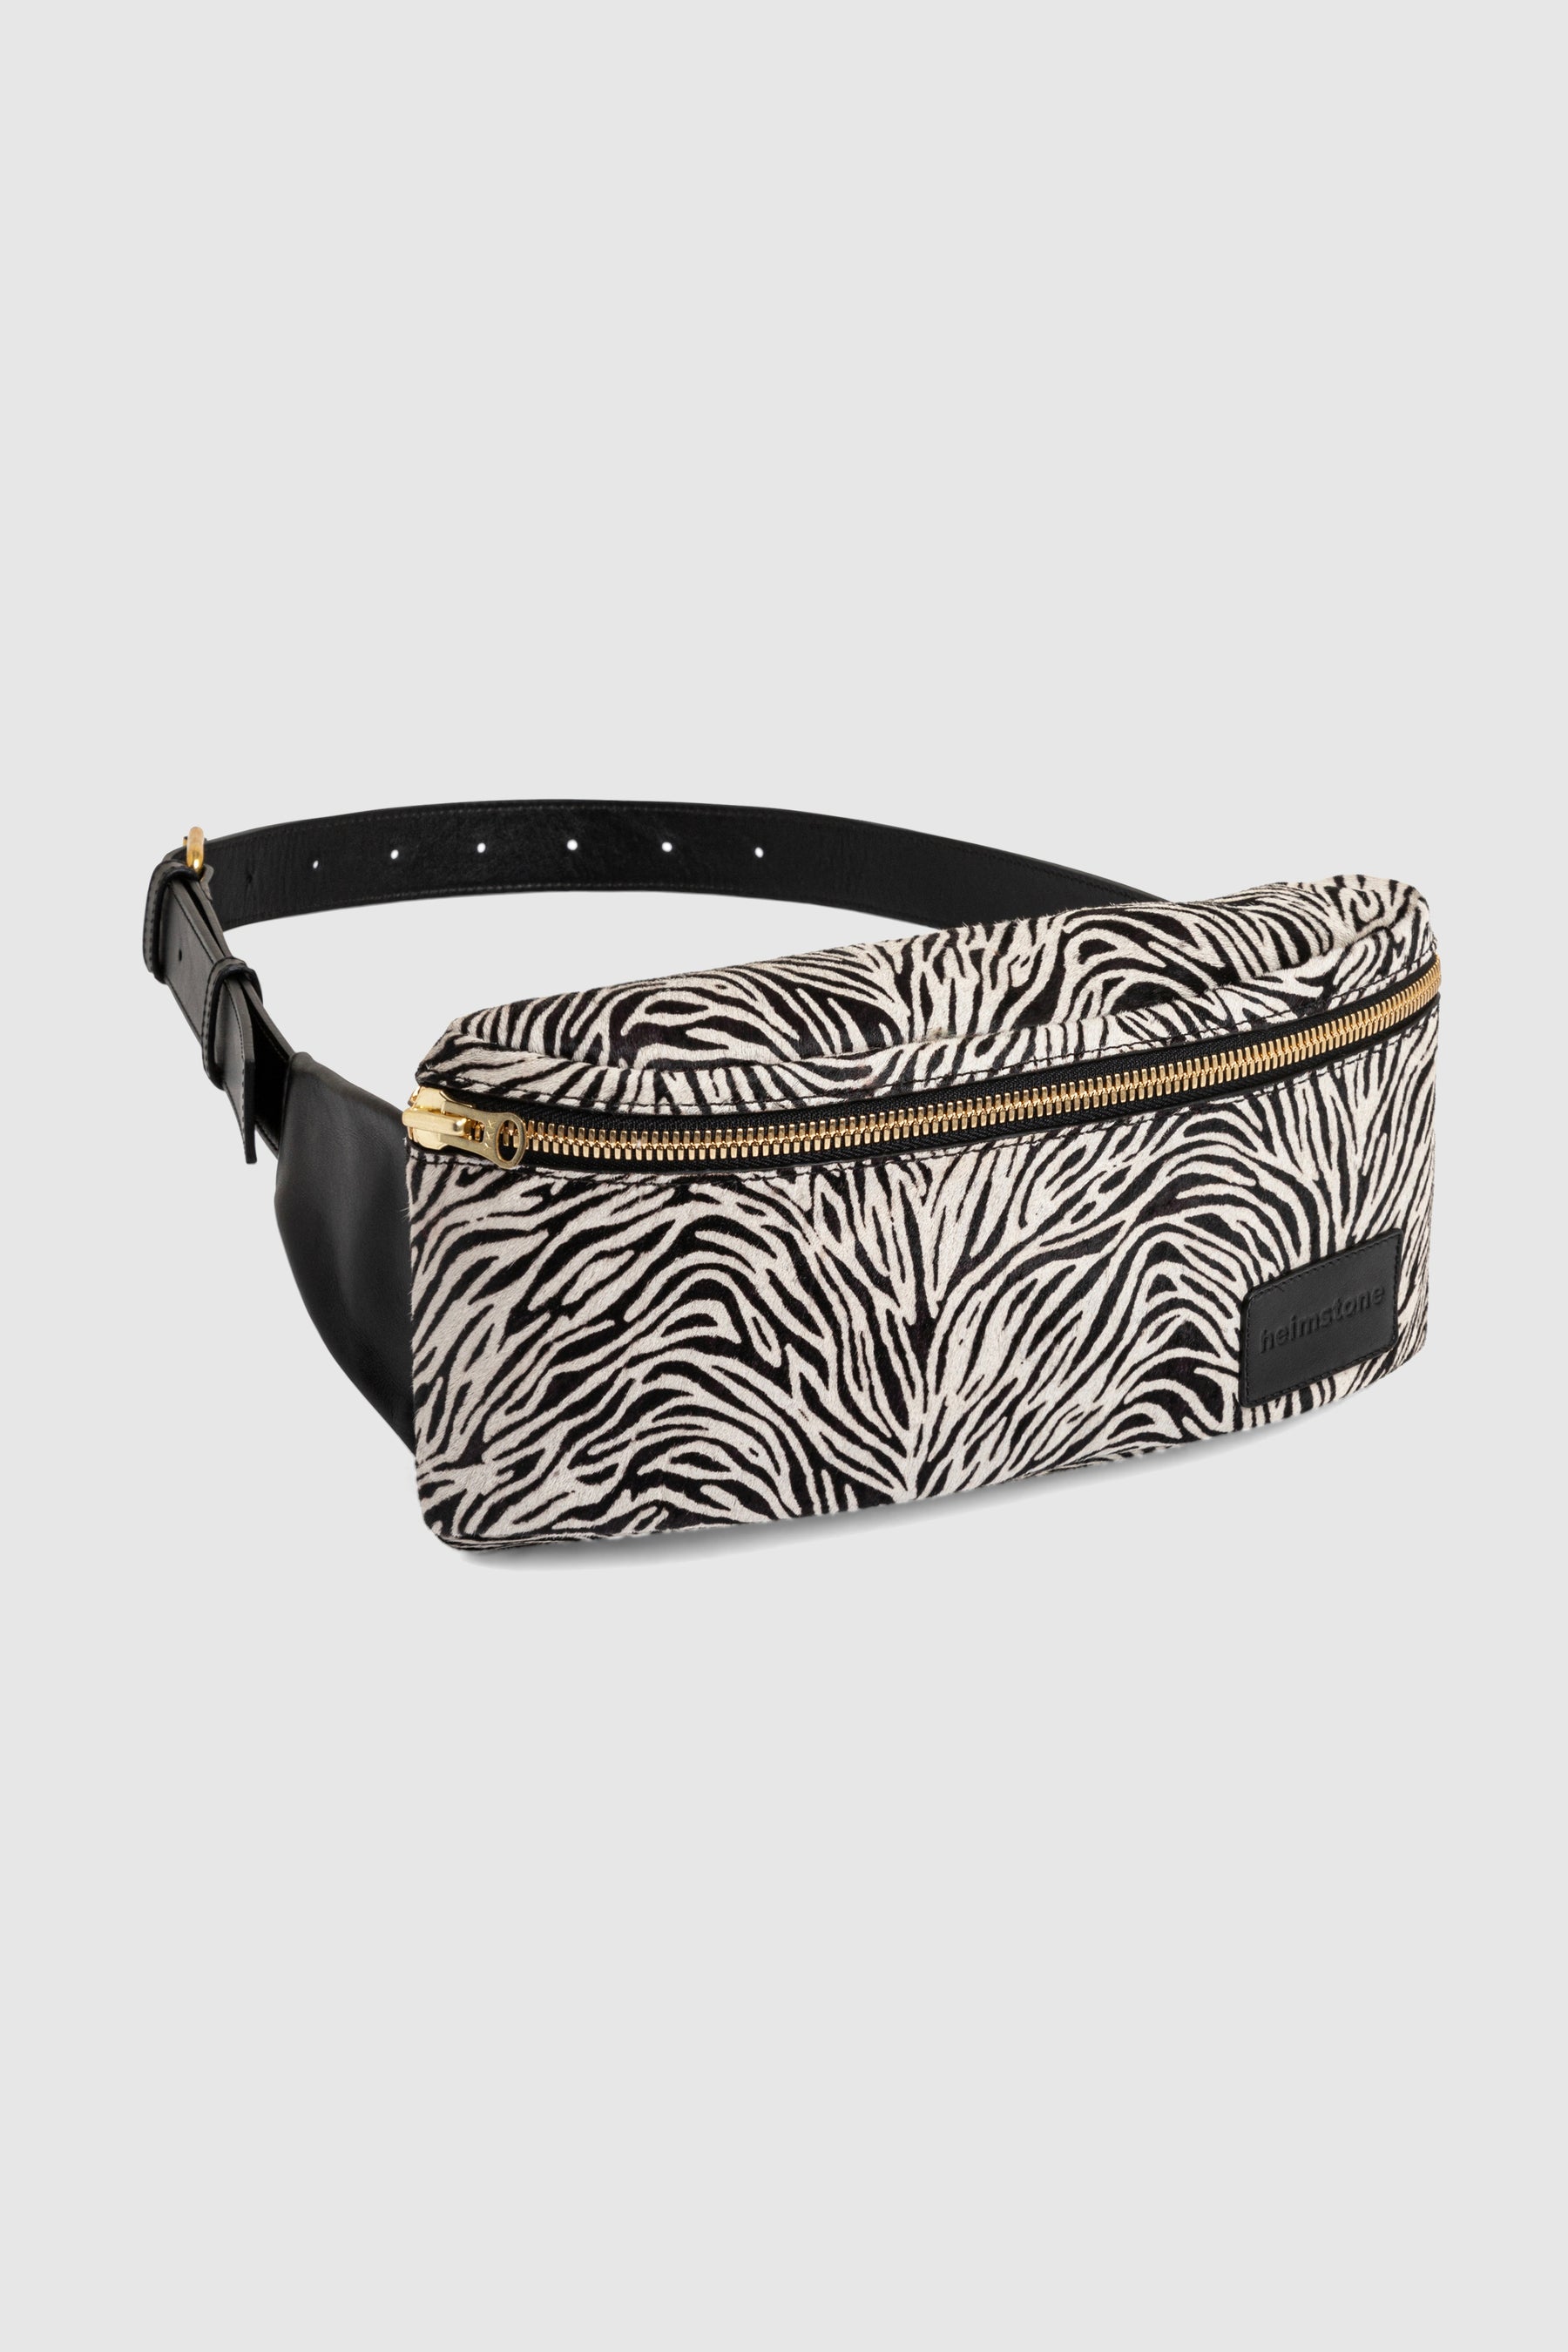 Fanny pack in Zebra printed leather